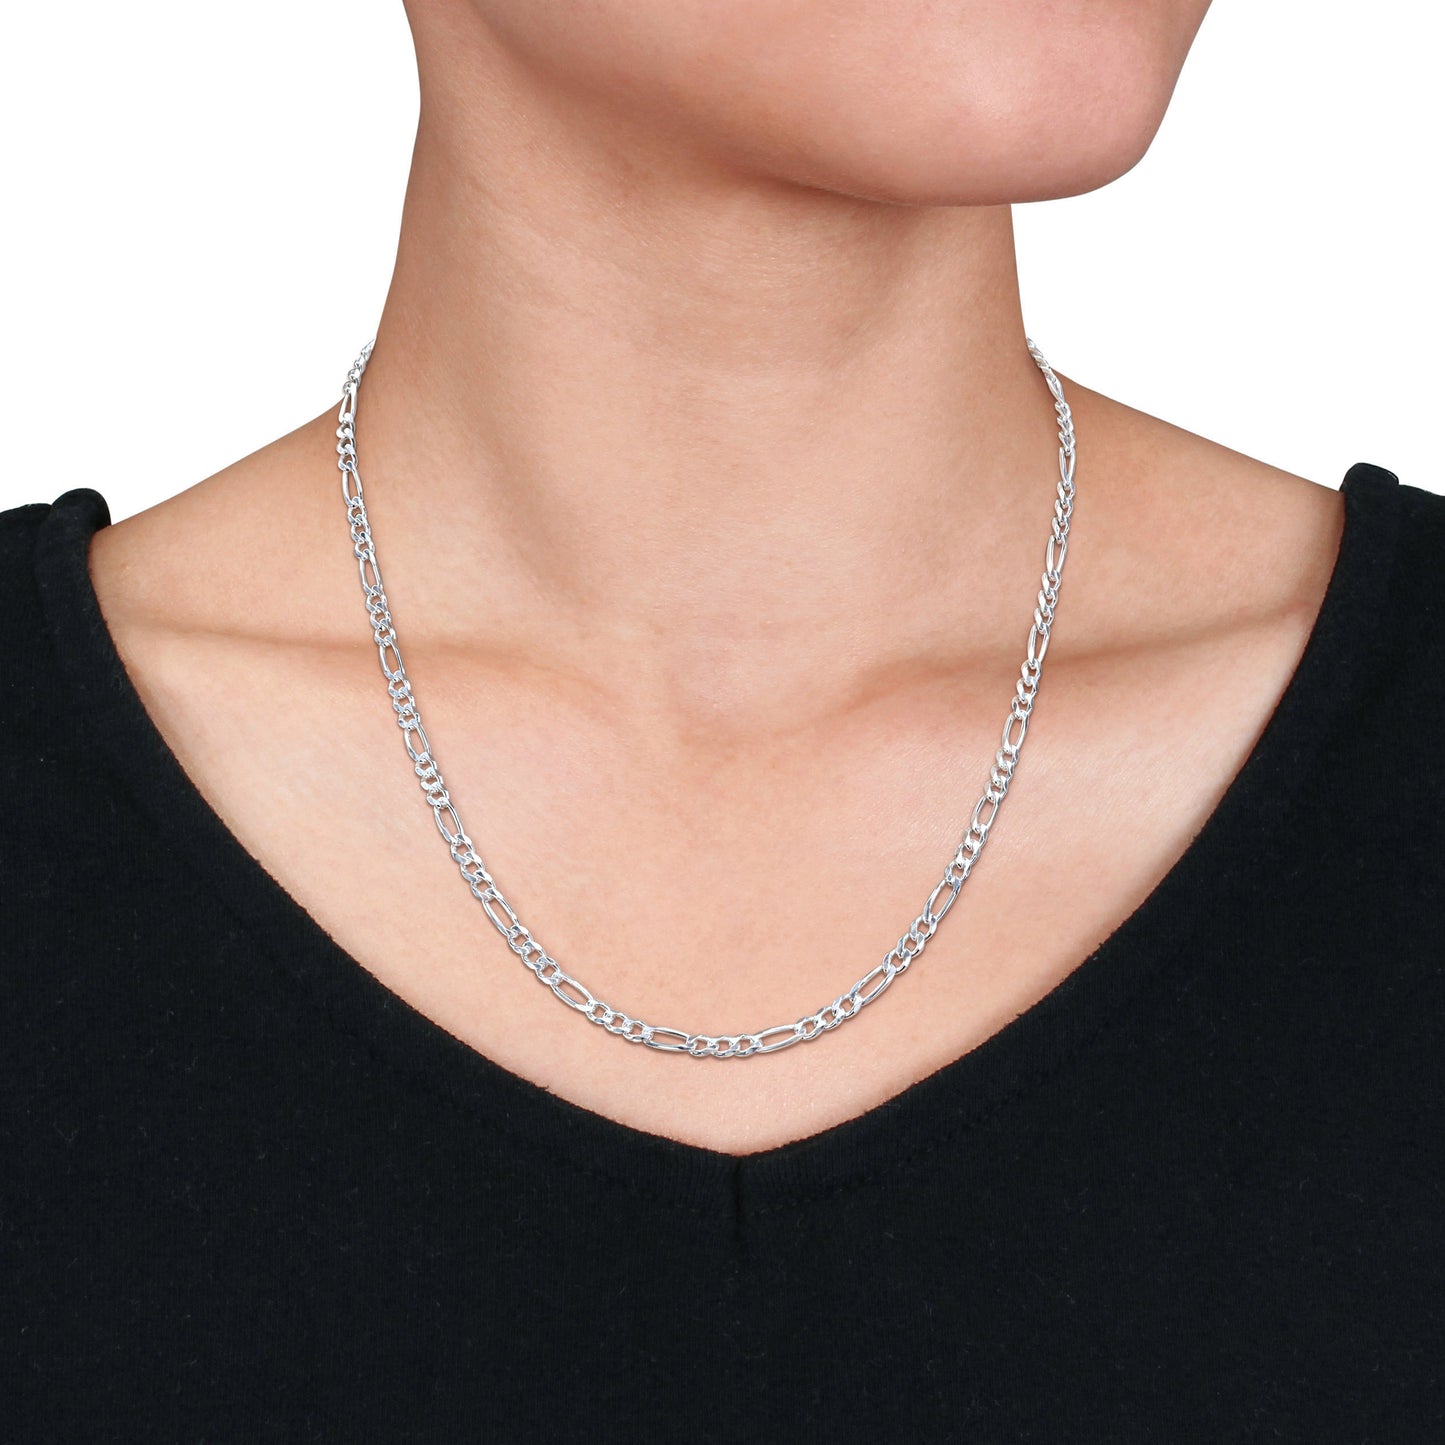 Sterling Silver Figaro Chain in 3.6mm